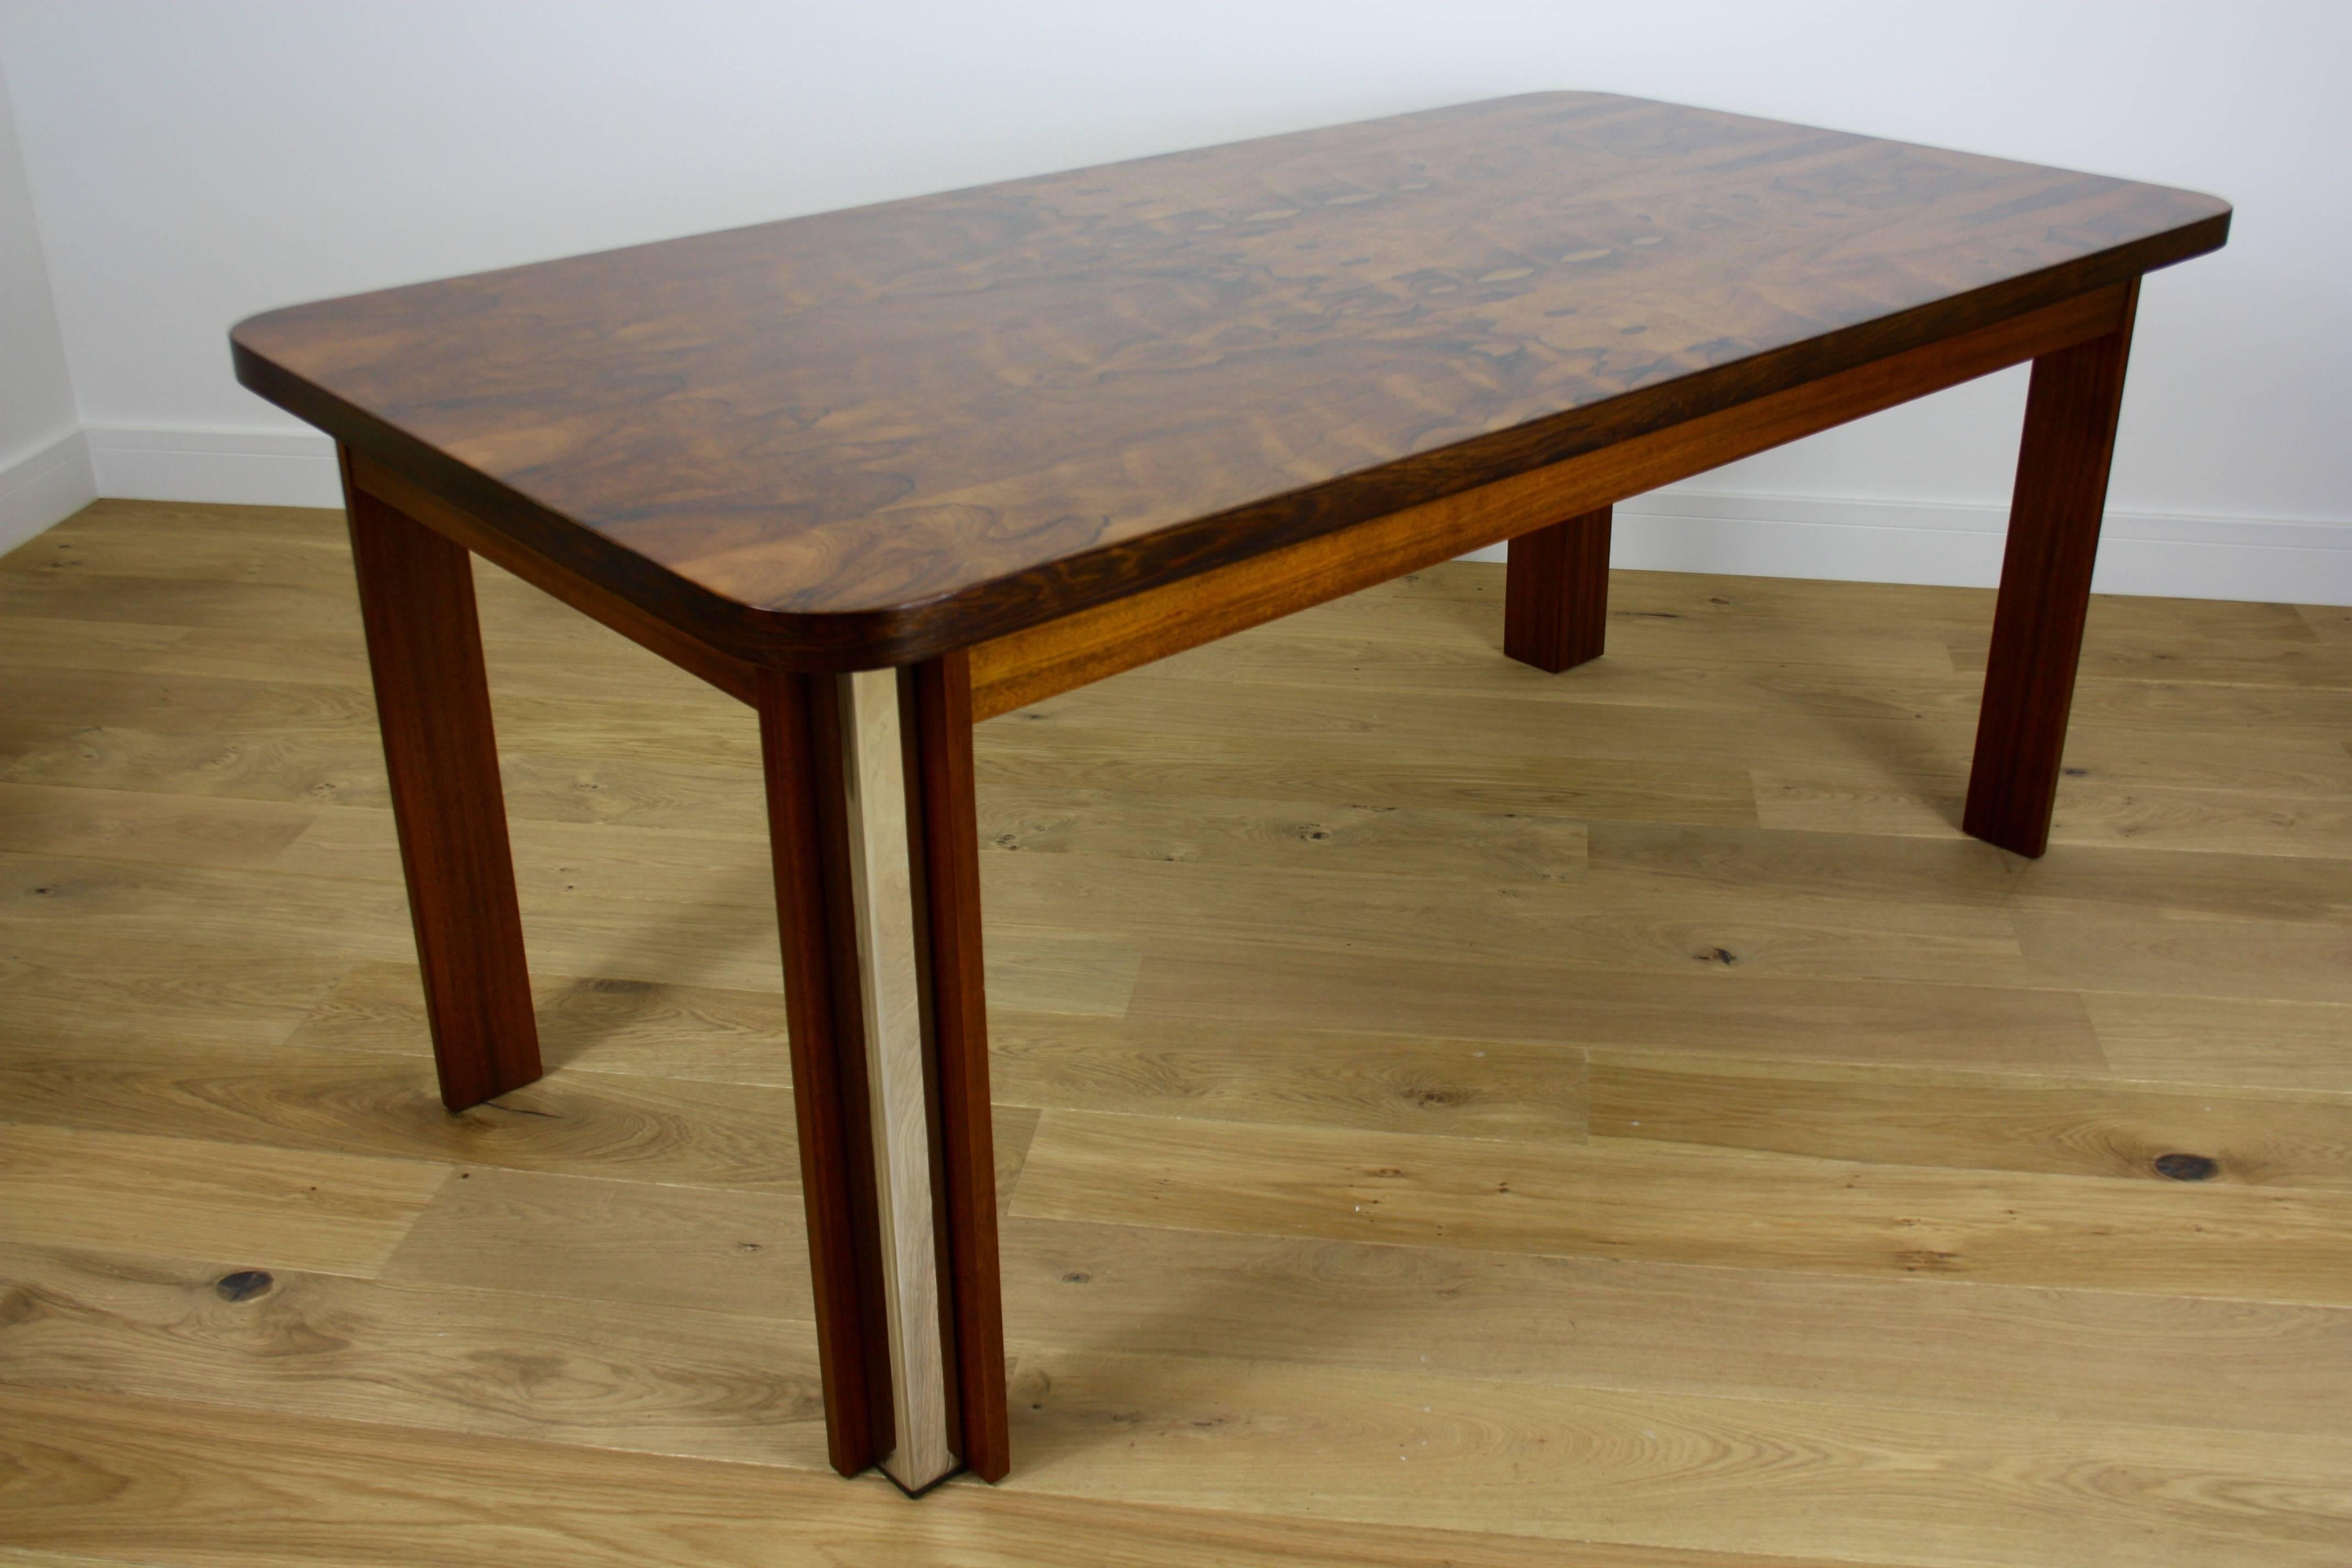 20th Century MID TWENTIETH CENTURY DESIGN ROSEWOOD DINING TABLE And CHAIRS